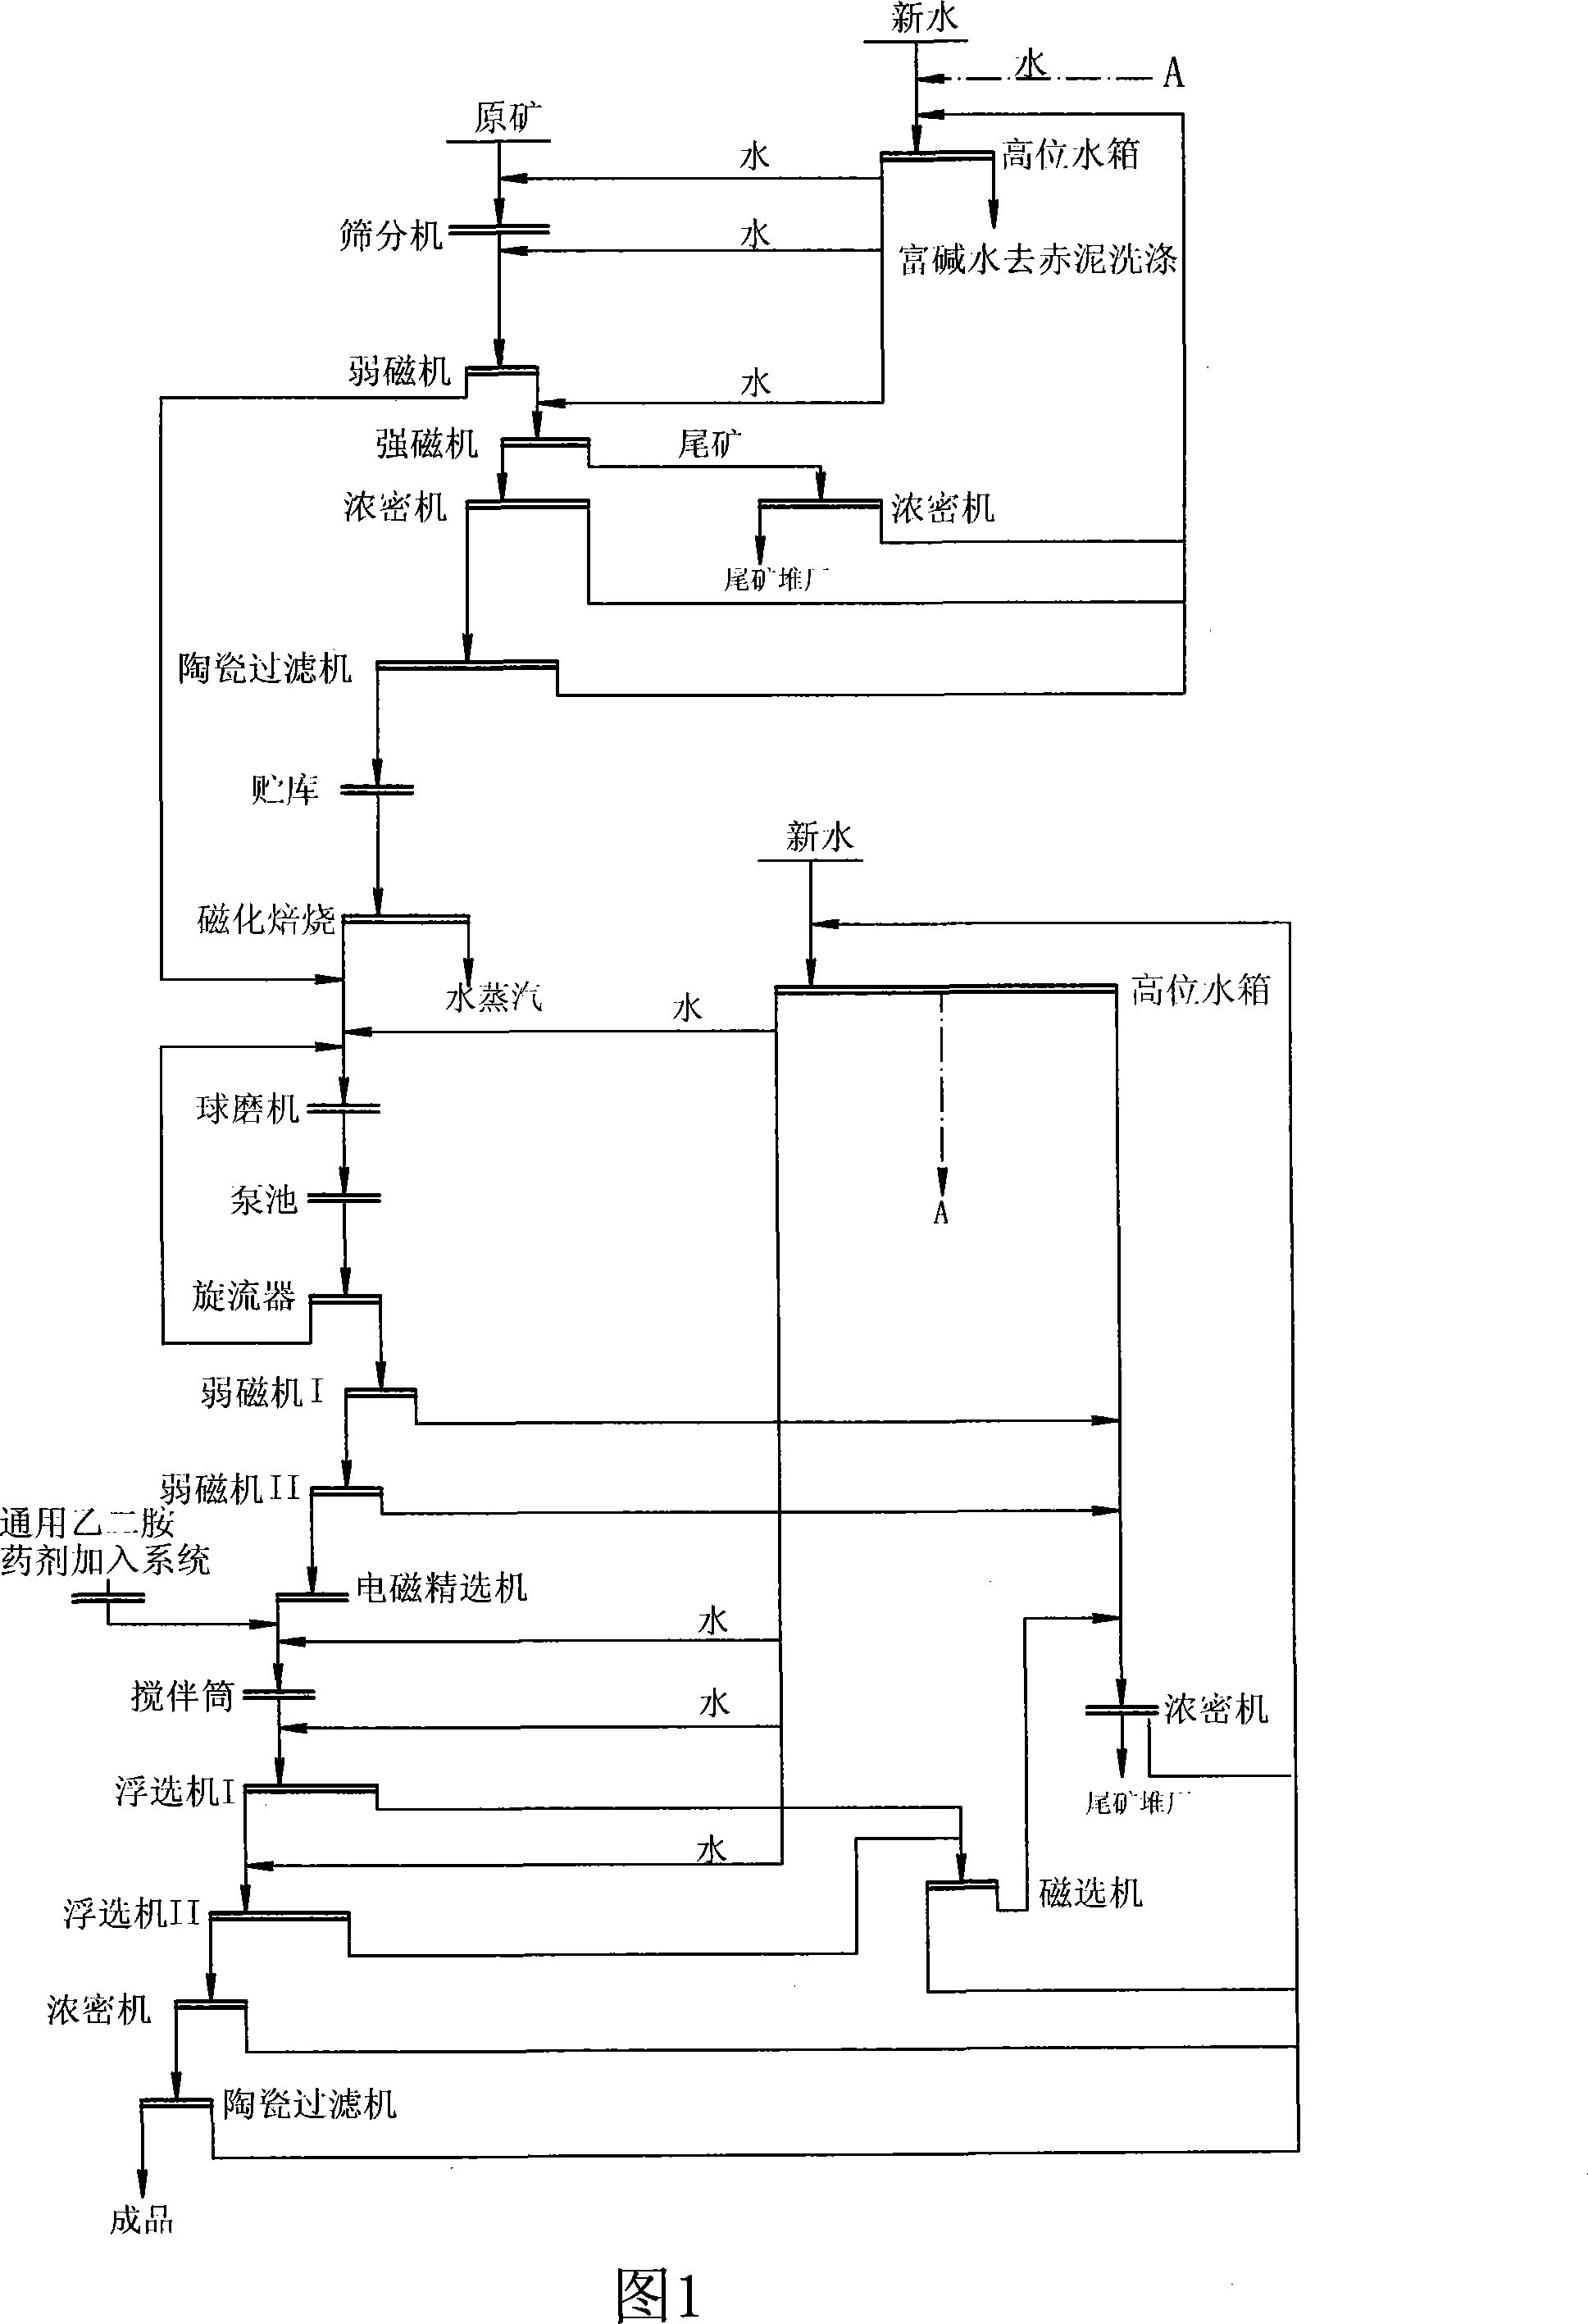 Method of refining iron ore from alkaline red mud and making gangue neutral